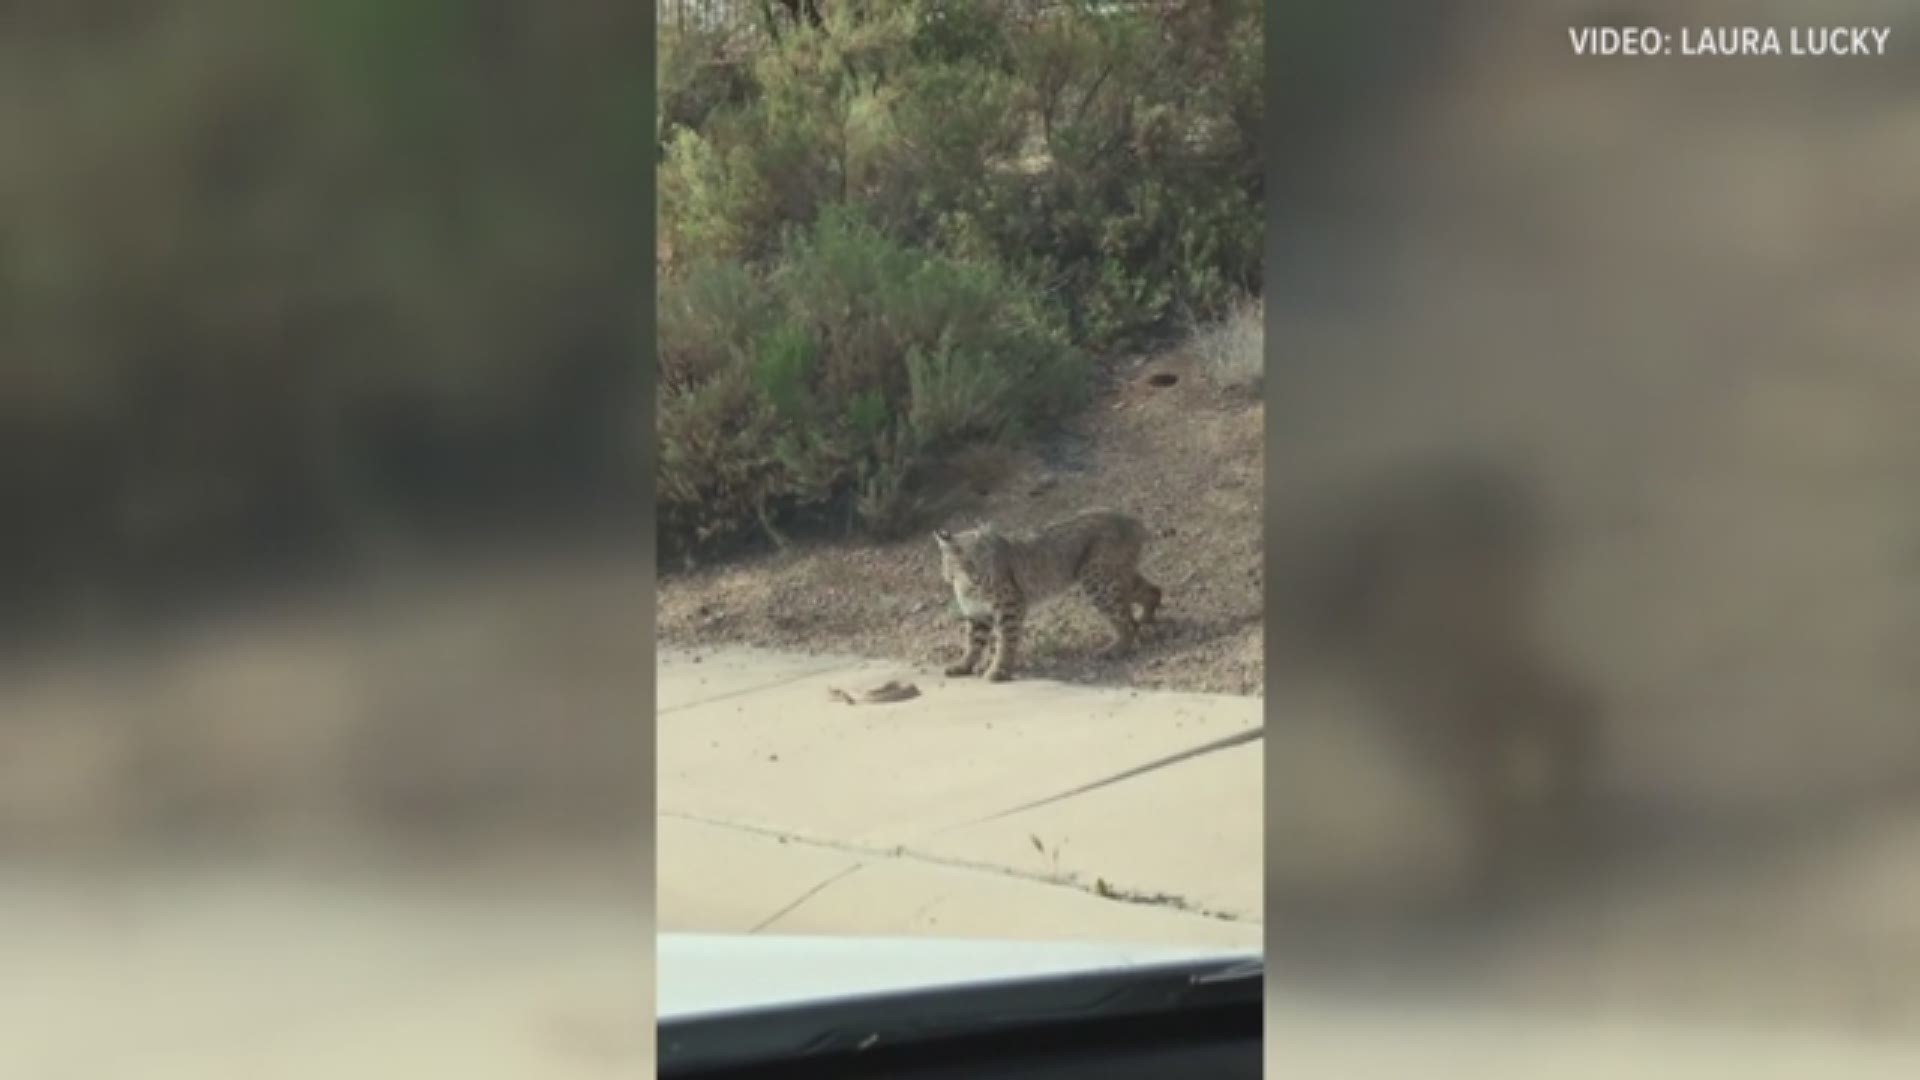 Laura Lucky was driving around the Valley when she stumbled across a fight between a bobcat and rattlesnake.